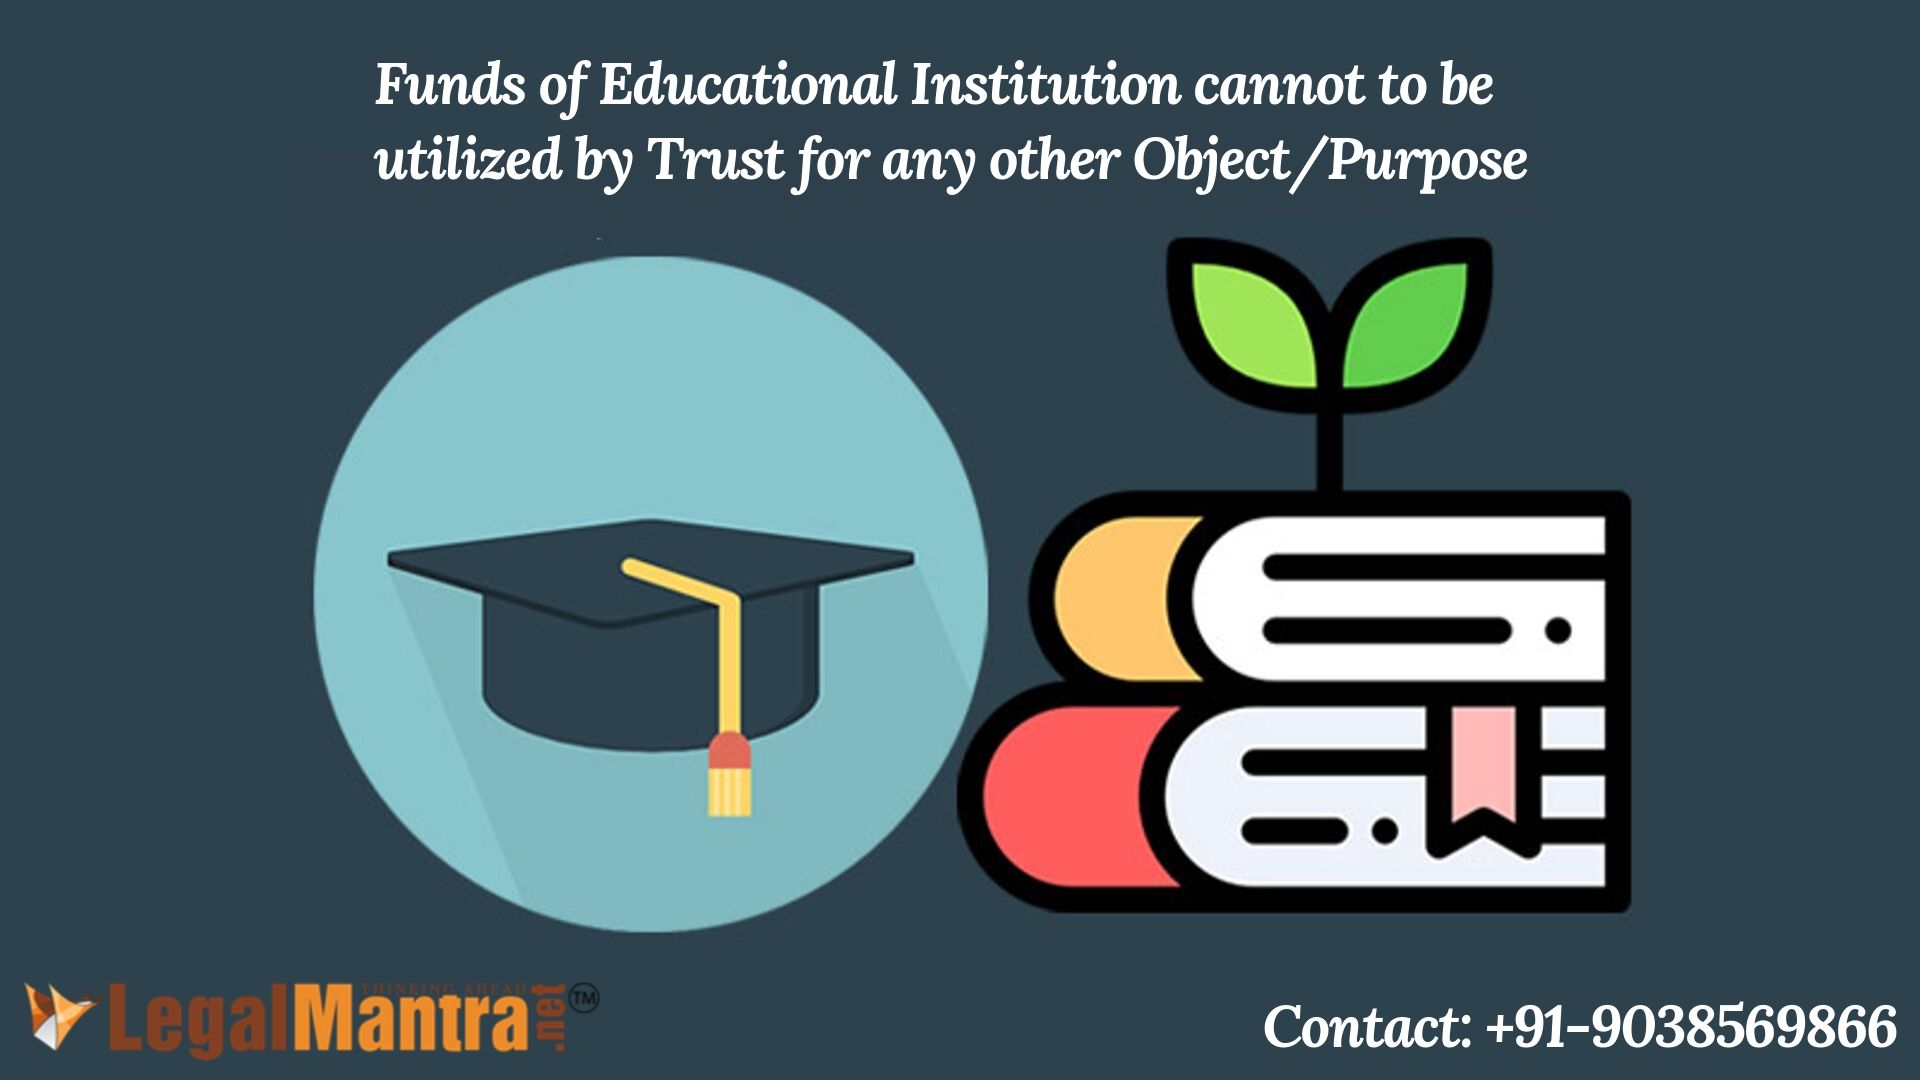 Funds of the Educational Institution cannot to be Utilized by Trust for any Other Object/Purpose